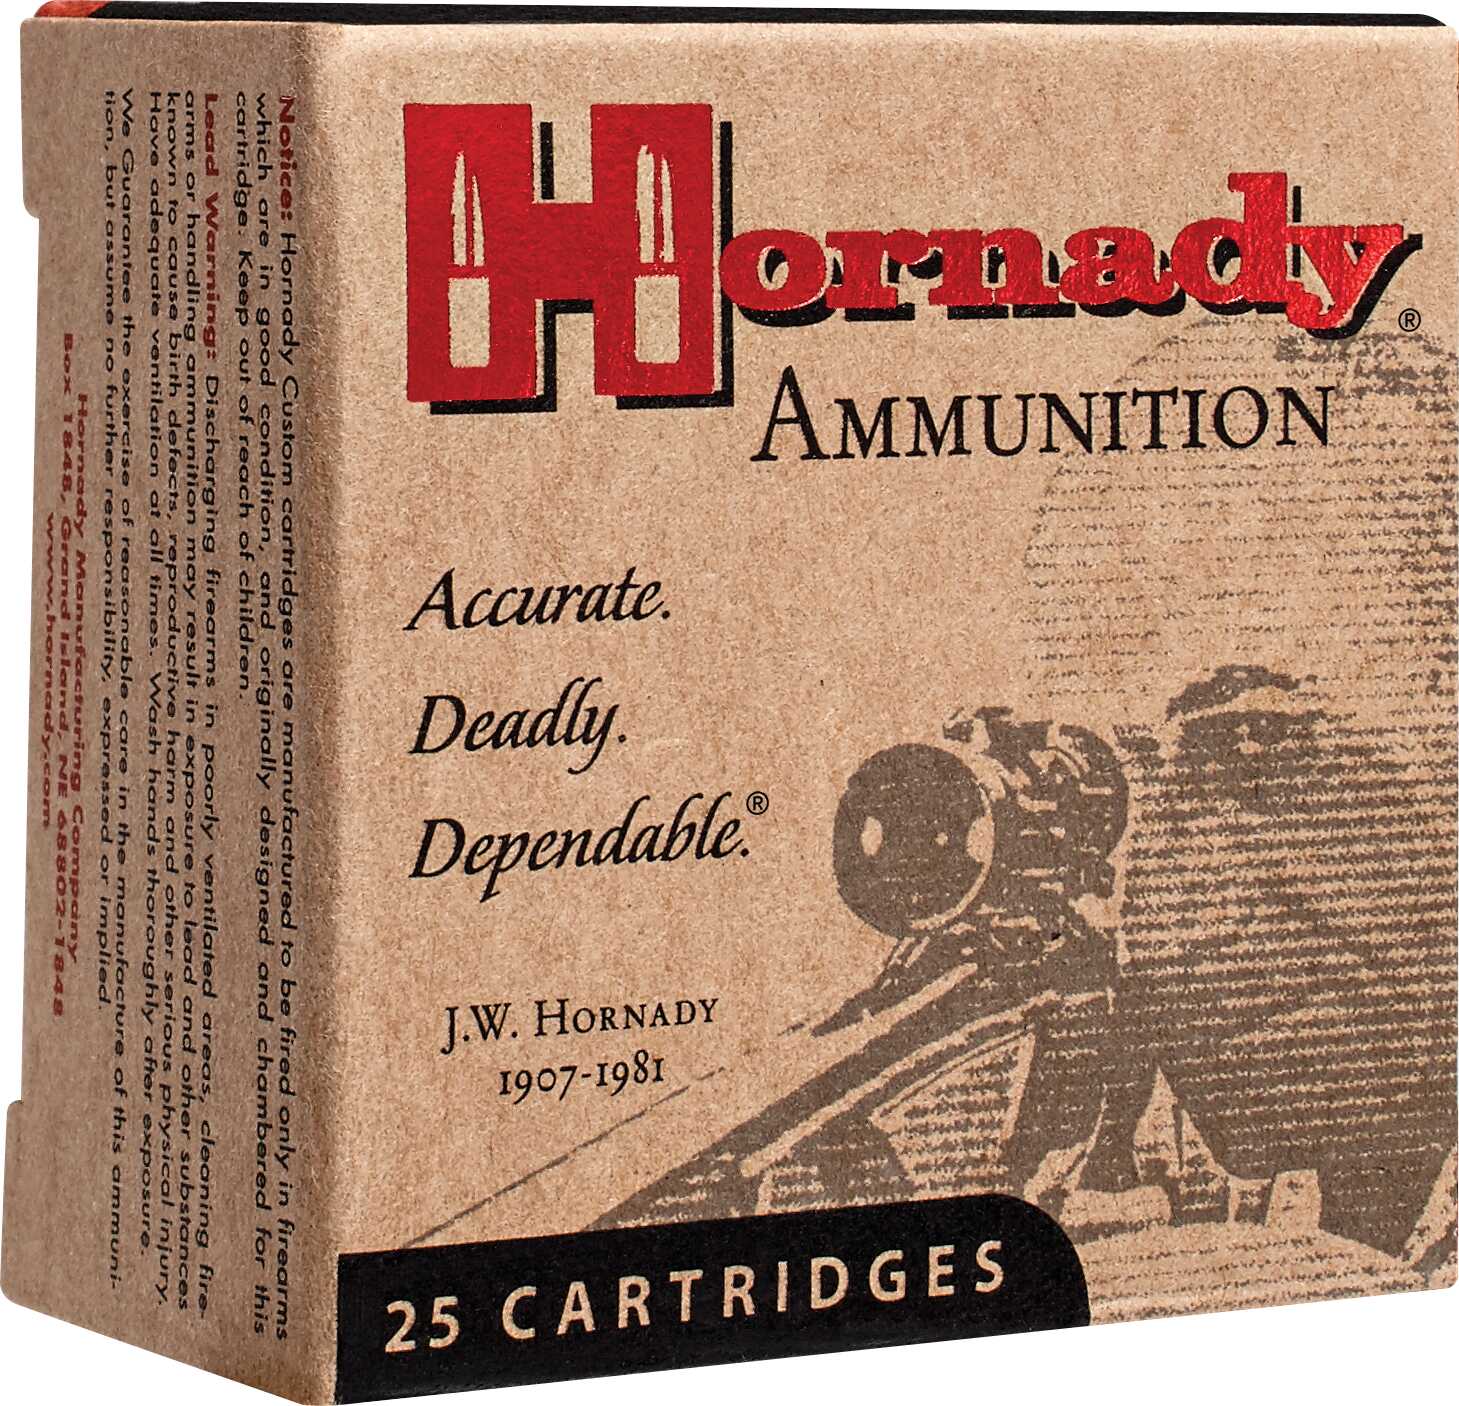 25 ACP 50 Grain Jacketed Hollow Point Rounds Hornady Ammunition